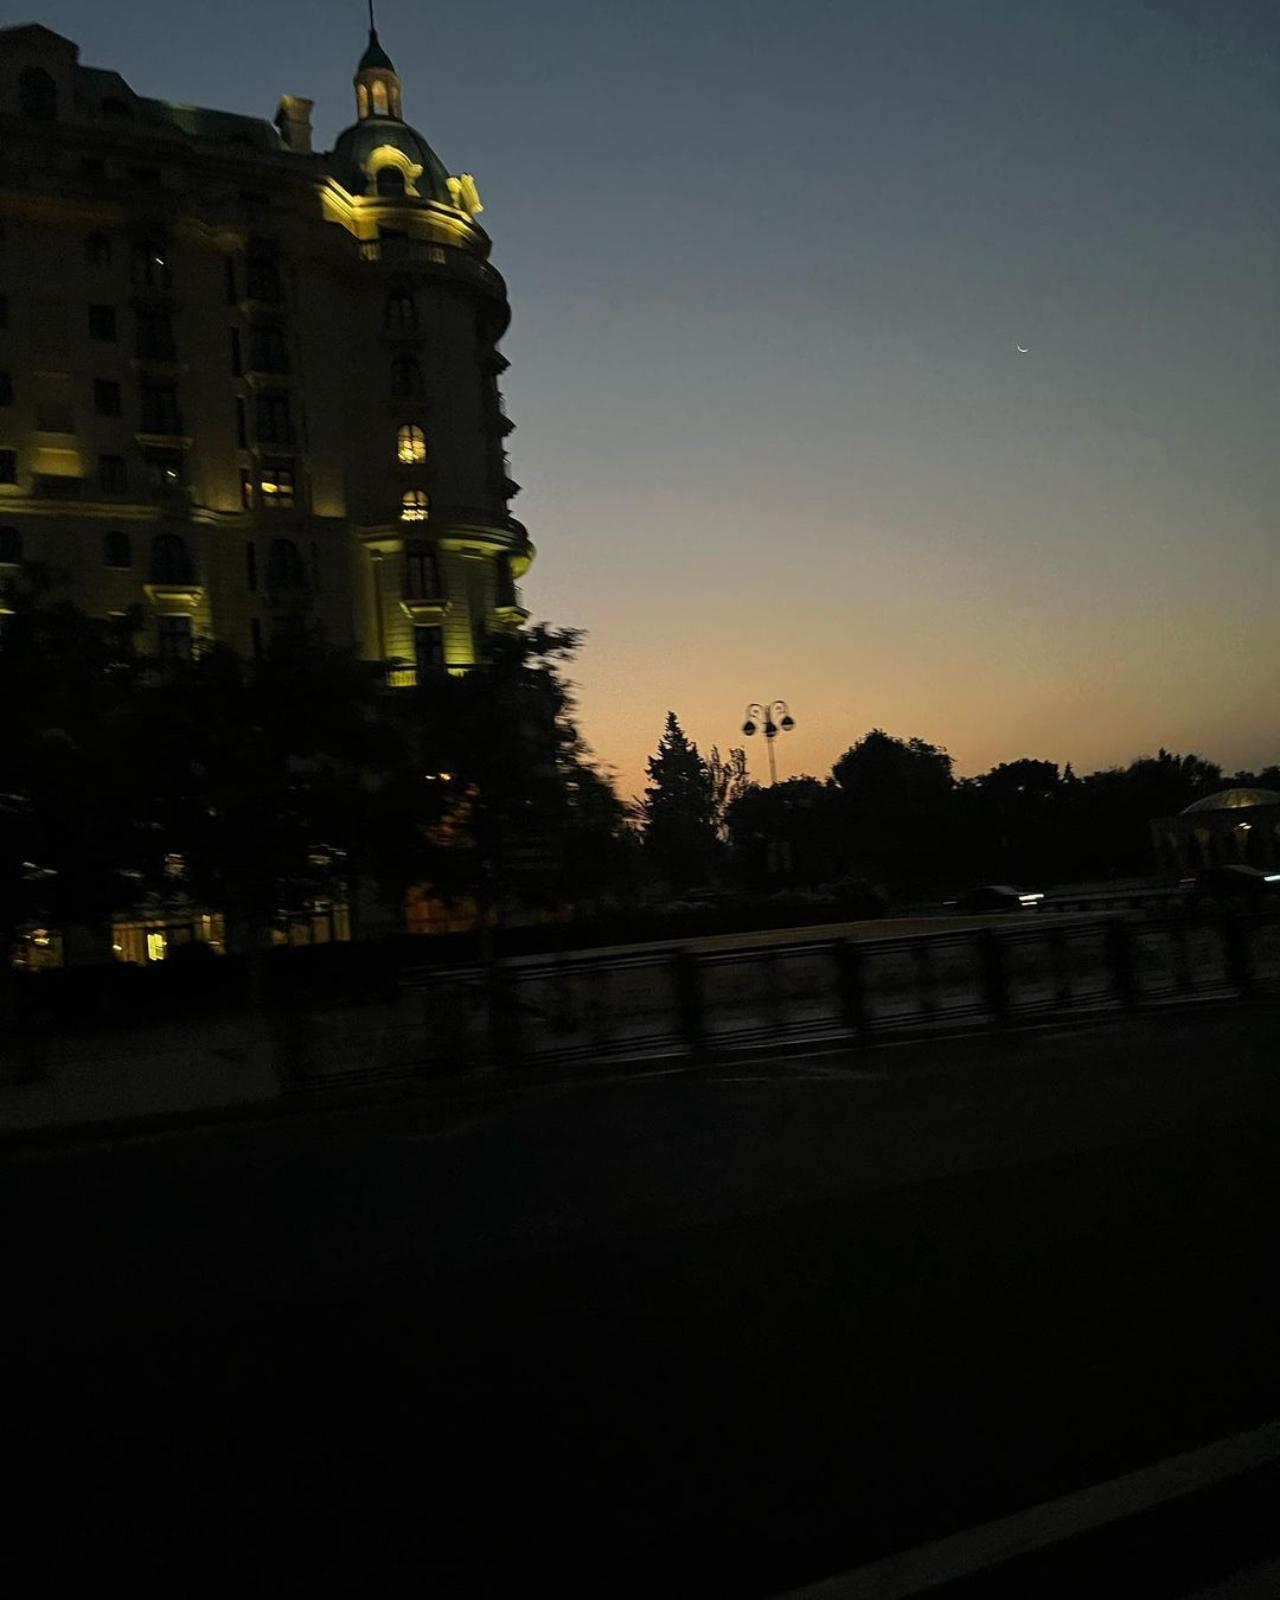 From dusk to dawn, the BFF gang saw it all! Malaika shared a beautiful photo of Baku in the wee hours of the morning